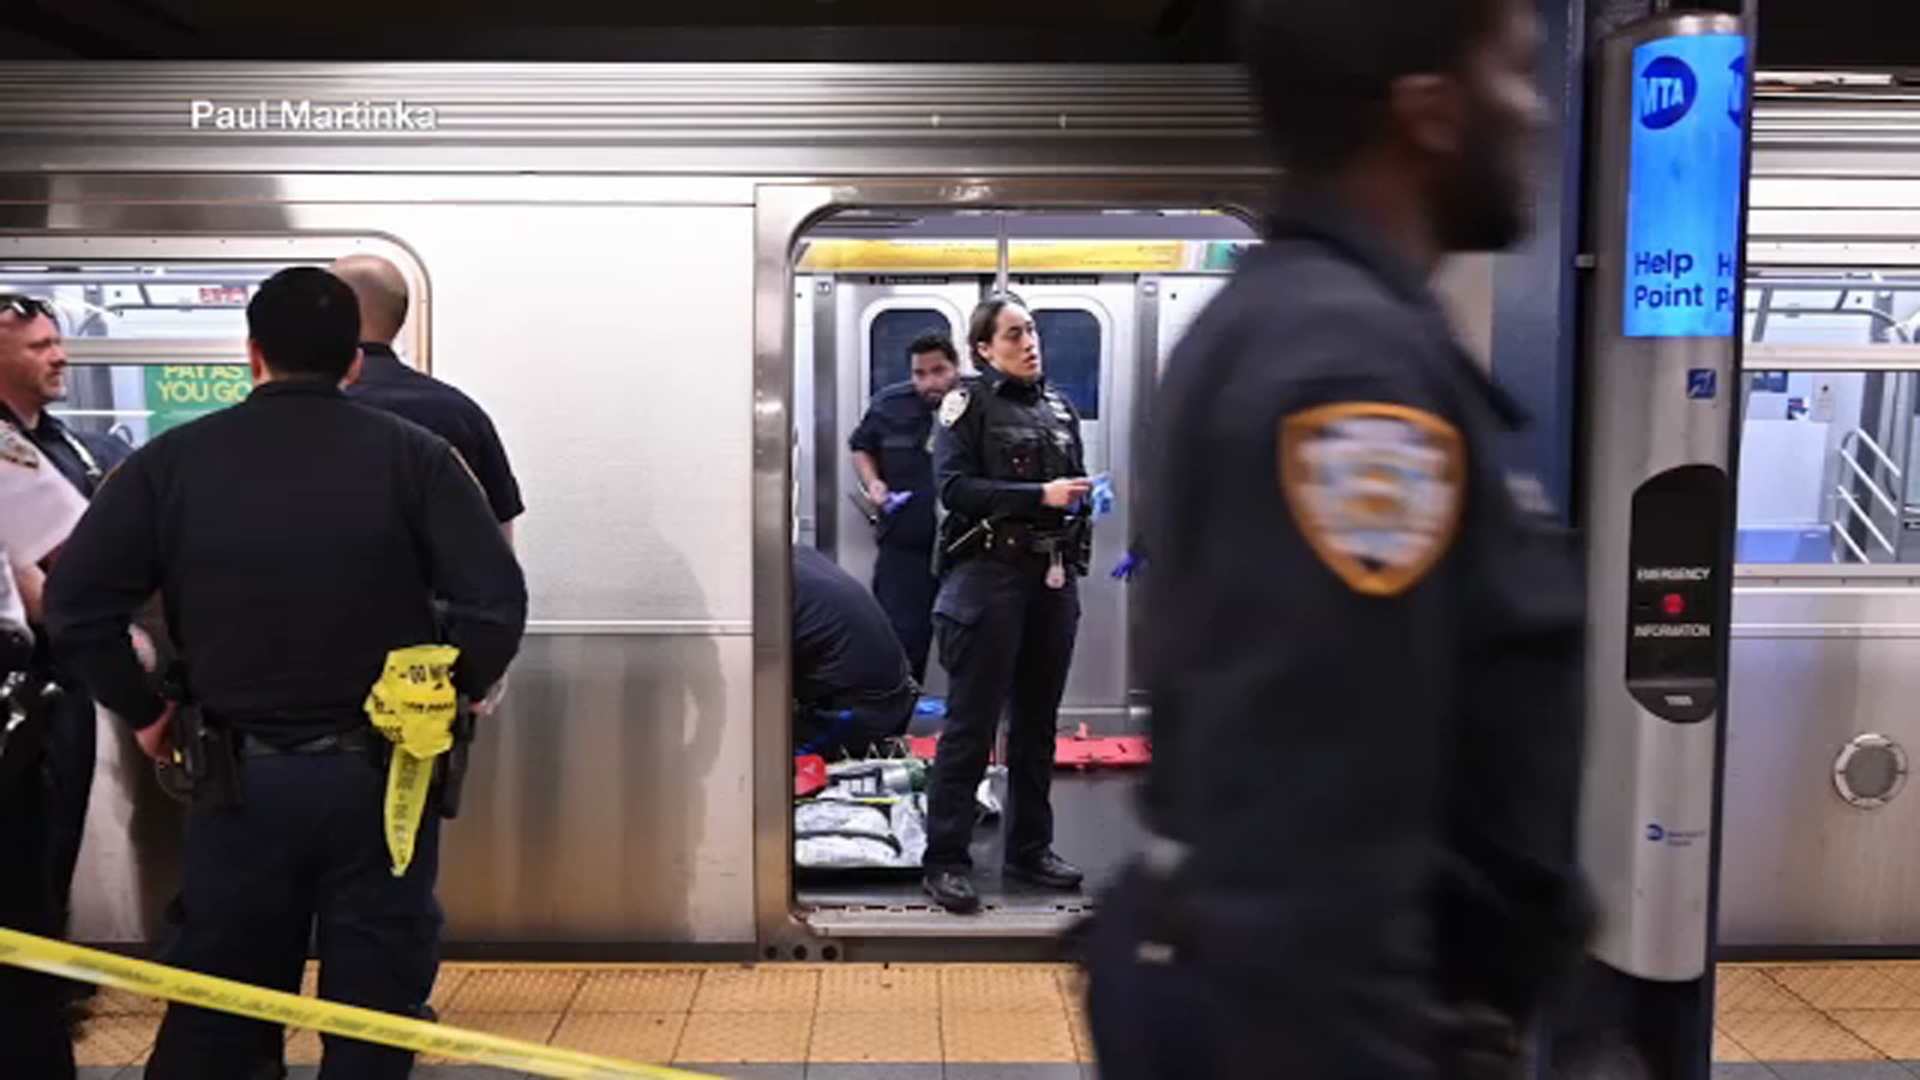 Man who fatally choked NYC subway rider Jordan Neely released on